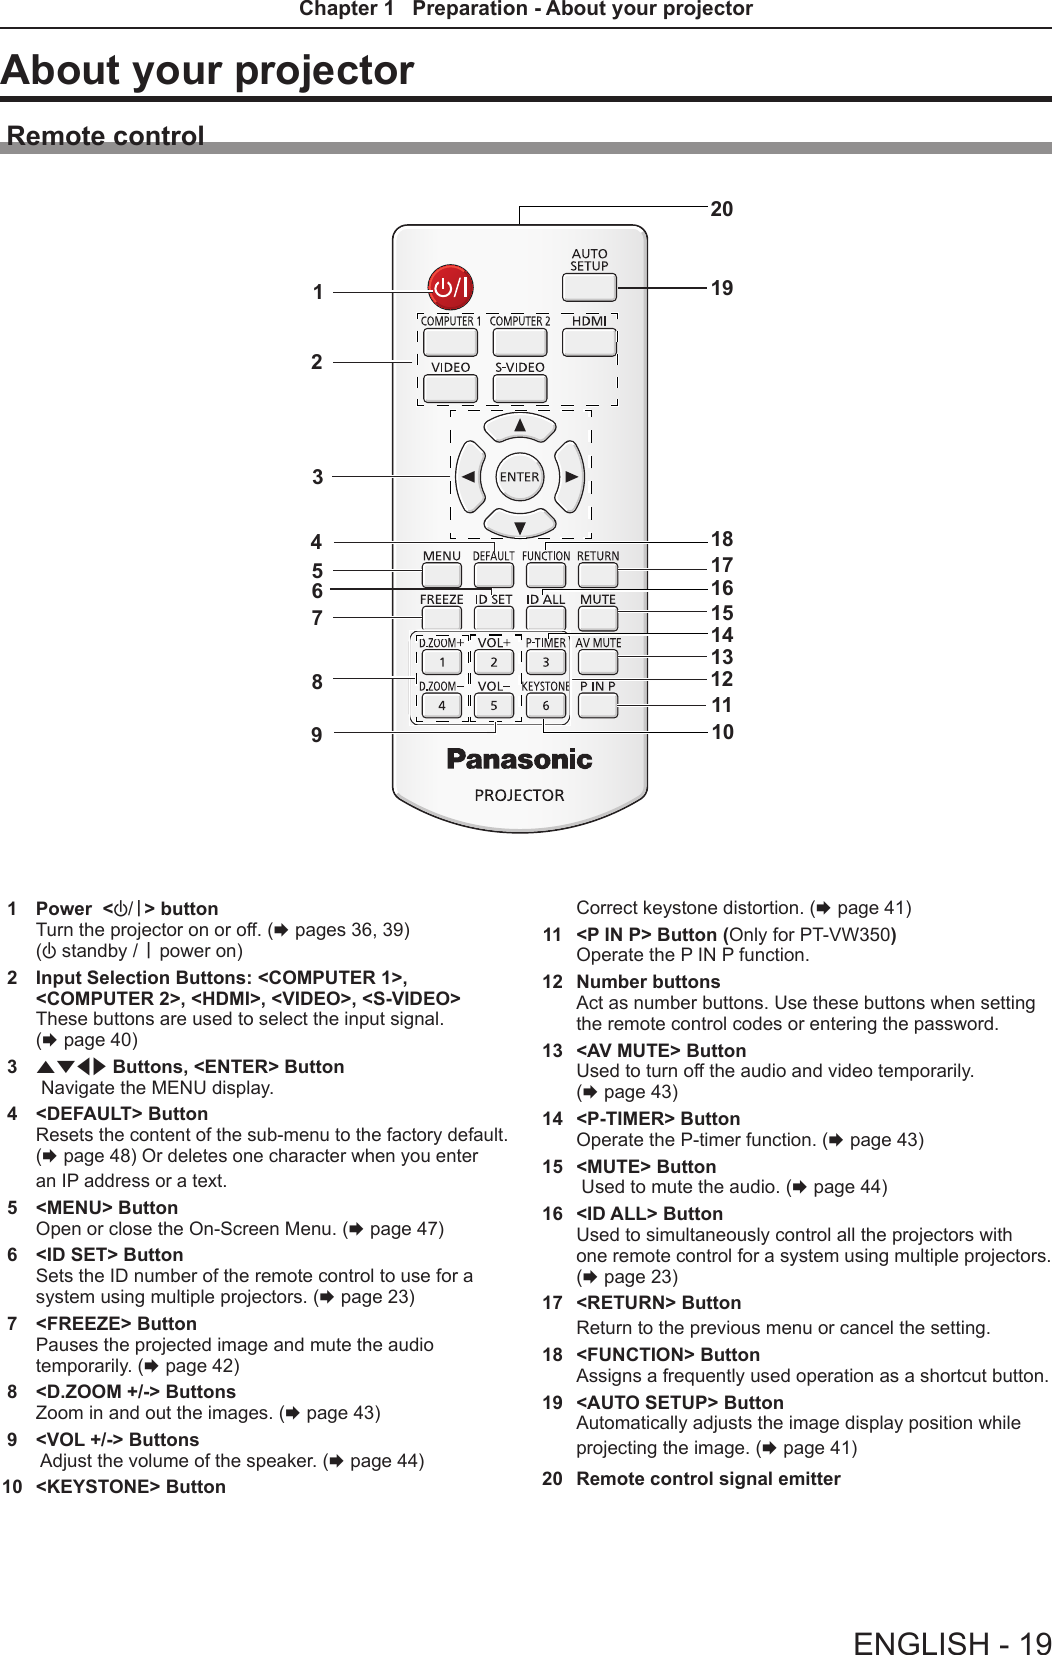 About your projectorRemote control1  Power  &lt;v/b&gt; buttonTurn the projector on or off. (x pages 36, 39)(v standby / b power on)2  Input Selection Buttons: &lt;COMPUTER 1&gt;, &lt;COMPUTER 2&gt;, &lt;HDMI&gt;, &lt;VIDEO&gt;, &lt;S-VIDEO&gt; These buttons are used to select the input signal.  (x page 40)3  asqw Buttons, &lt;ENTER&gt; Button Navigate the MENU display.4  &lt;DEFAULT&gt; ButtonResets the content of the sub-menu to the factory default.  (x page 48) Or deletes one character when you enter an IP address or a text.5  &lt;MENU&gt; ButtonOpen or close the On-Screen Menu. (x page 47)6  &lt;ID SET&gt; ButtonSets the ID number of the remote control to use for a system using multiple projectors. (x page 23)7  &lt;FREEZE&gt; ButtonPauses the projected image and mute the audio temporarily. (x page 42)8  &lt;D.ZOOM +/-&gt; ButtonsZoom in and out the images. (x page 43)9  &lt;VOL +/-&gt; Buttons  Adjust the volume of the speaker. (x page 44)10  &lt;KEYSTONE&gt; ButtonCorrect keystone distortion. (x page 41)11  &lt;P IN P&gt; Button (Only for PT-VW350)Operate the P IN P function.12  Number buttonsAct as number buttons. Use these buttons when setting the remote control codes or entering the password.13  &lt;AV MUTE&gt; ButtonUsed to turn off the audio and video temporarily.  (x page 43)14  &lt;P-TIMER&gt; ButtonOperate the P-timer function. (x page 43)15  &lt;MUTE&gt; Button Used to mute the audio. (x page 44)16  &lt;ID ALL&gt; ButtonUsed to simultaneously control all the projectors withone remote control for a system using multiple projectors.   (x page 23)17  &lt;RETURN&gt; ButtonReturn to the previous menu or cancel the setting.18  &lt;FUNCTION&gt; ButtonAssigns a frequently used operation as a shortcut button.19  &lt;AUTO SETUP&gt; ButtonAutomatically adjusts the image display position while projecting the image. (x page 41)20  Remote control signal emitter1235789461011131415161718192012ENGLISH - 19Chapter 1   Preparation - About your projector